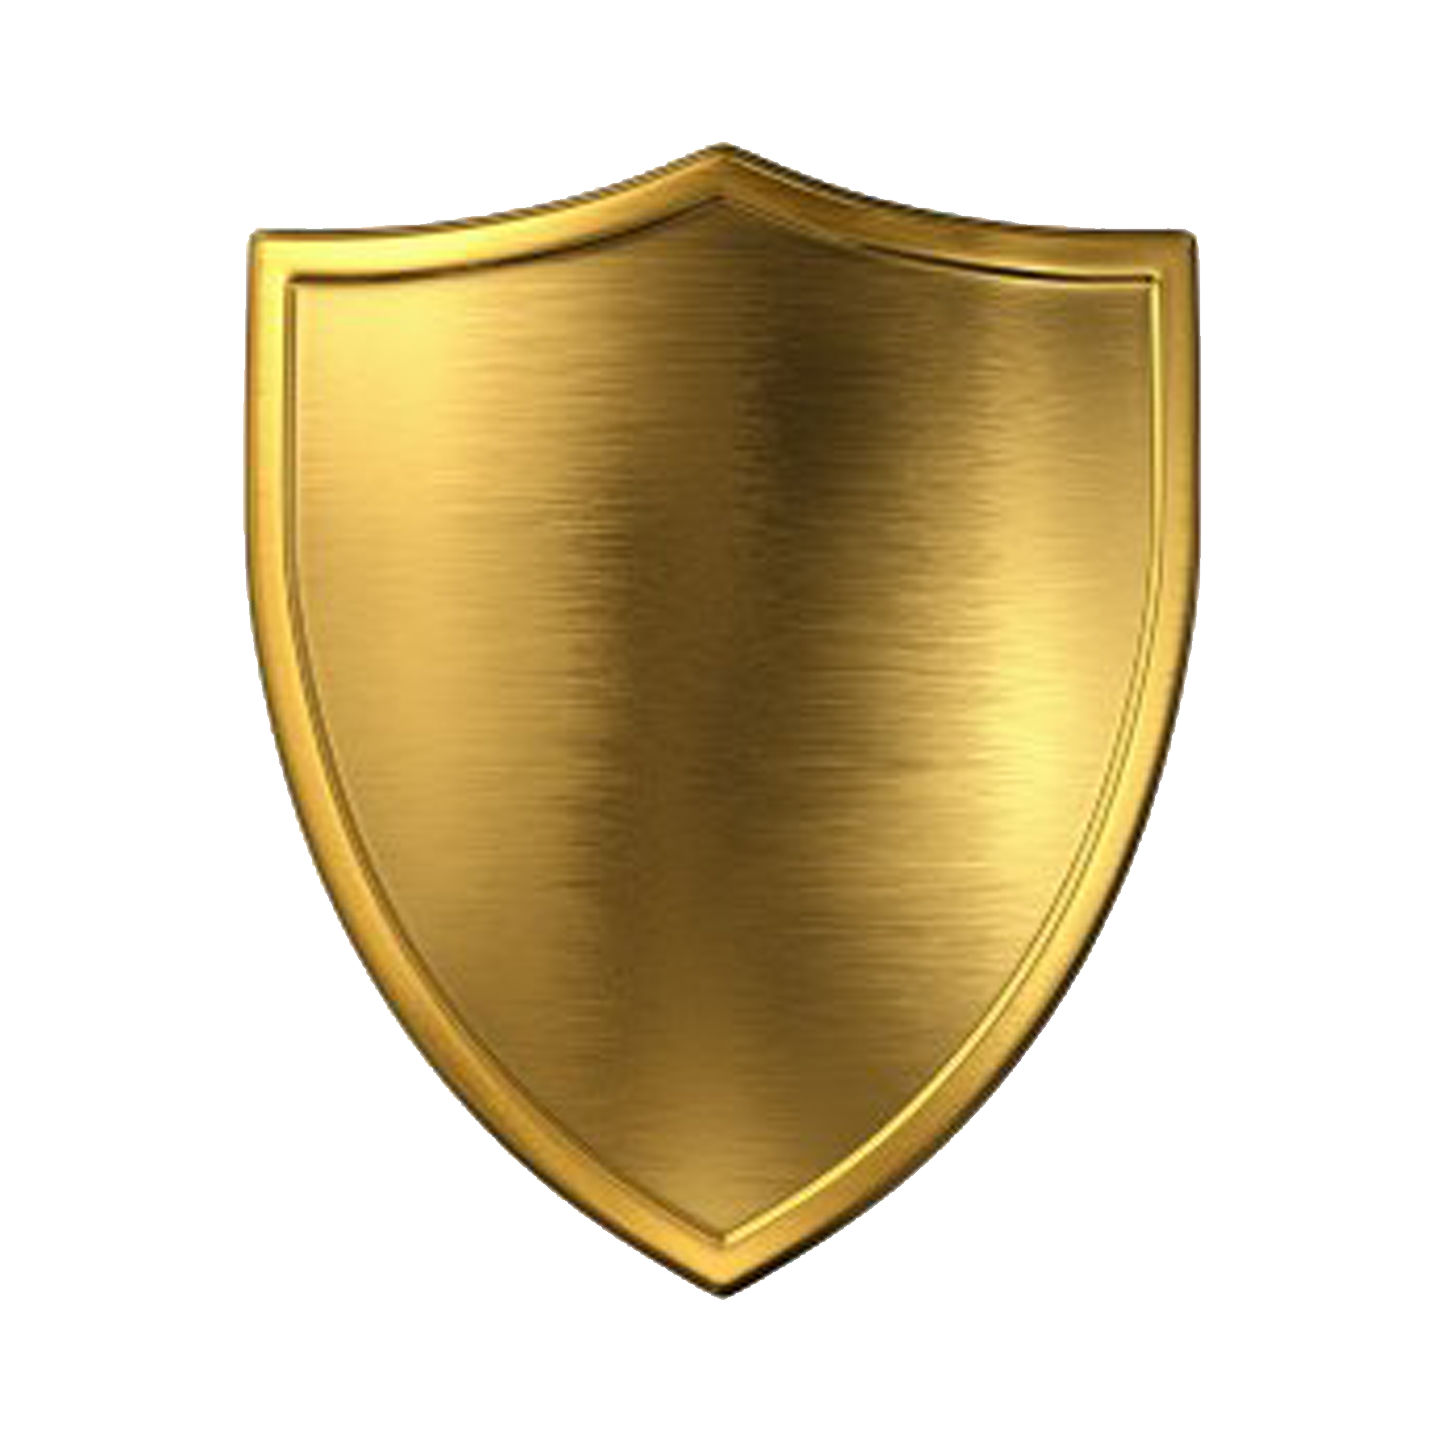 gold shield PNG image, free picture download